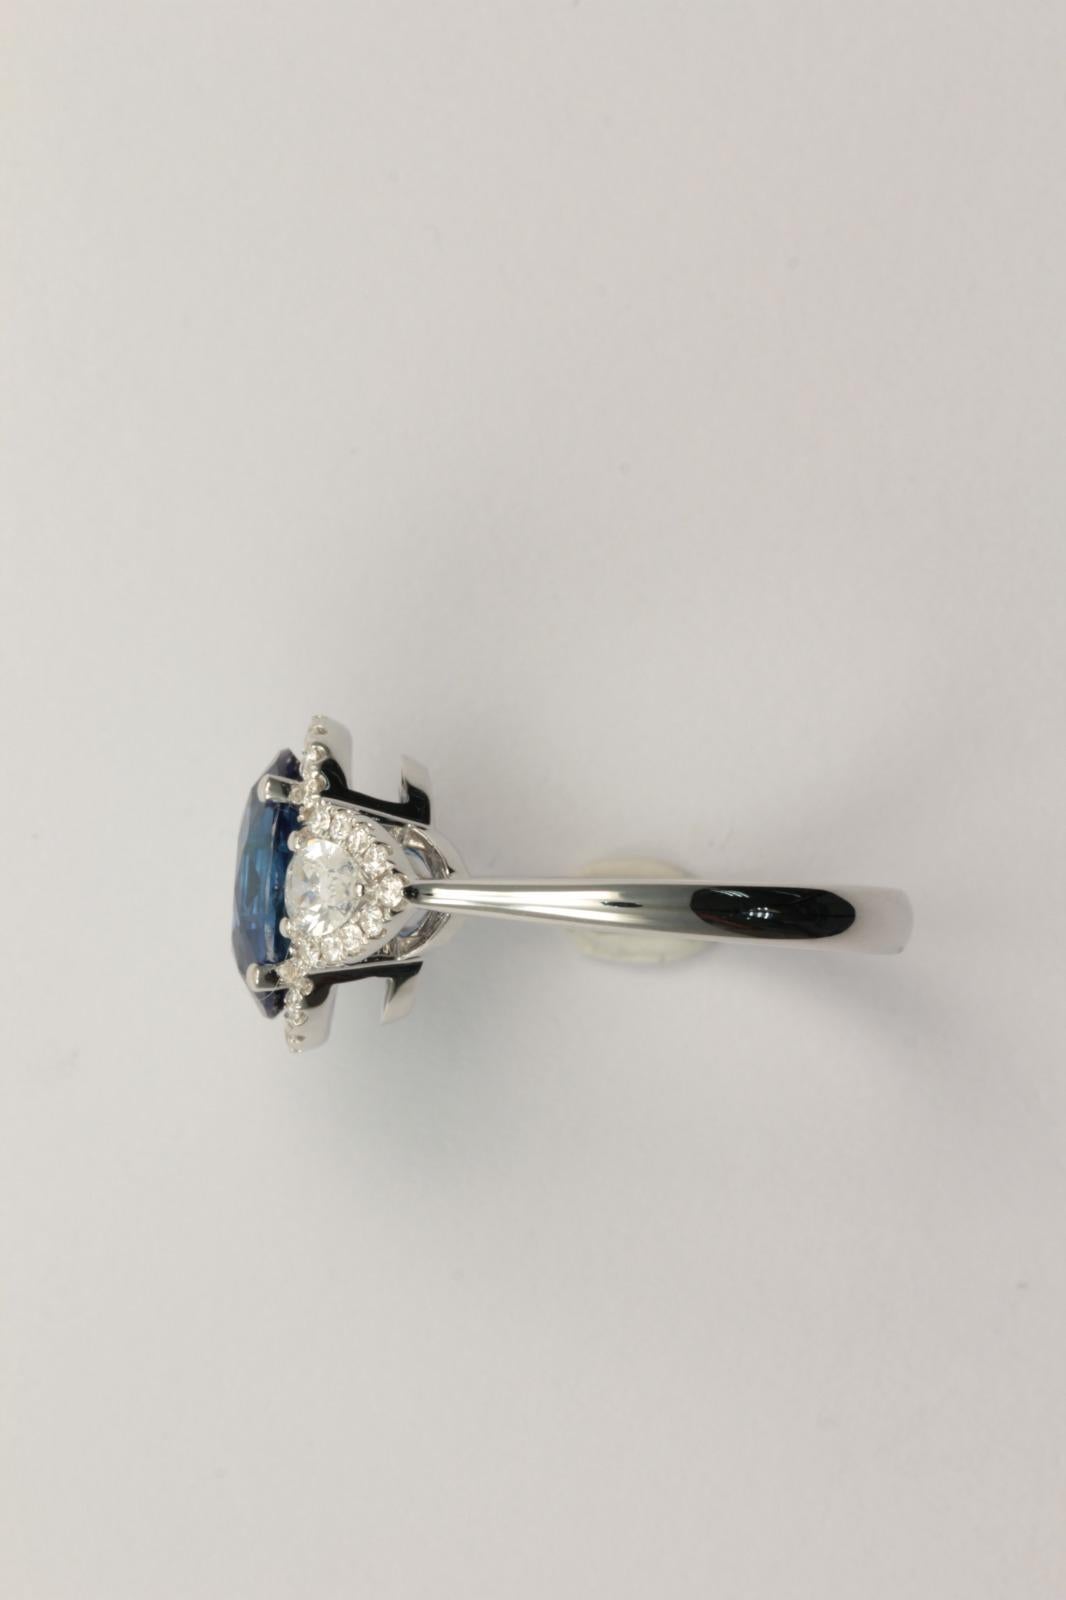 Set with an oval-shaped sapphire weighing 3.18 carats, flanked on either side by pear diamonds totaling 0.50 ct, surrounded by multiple round diamonds totaling 0.27 ct and mounted in 18k white gold, ring size 6½

Accompanied from the Gem Research